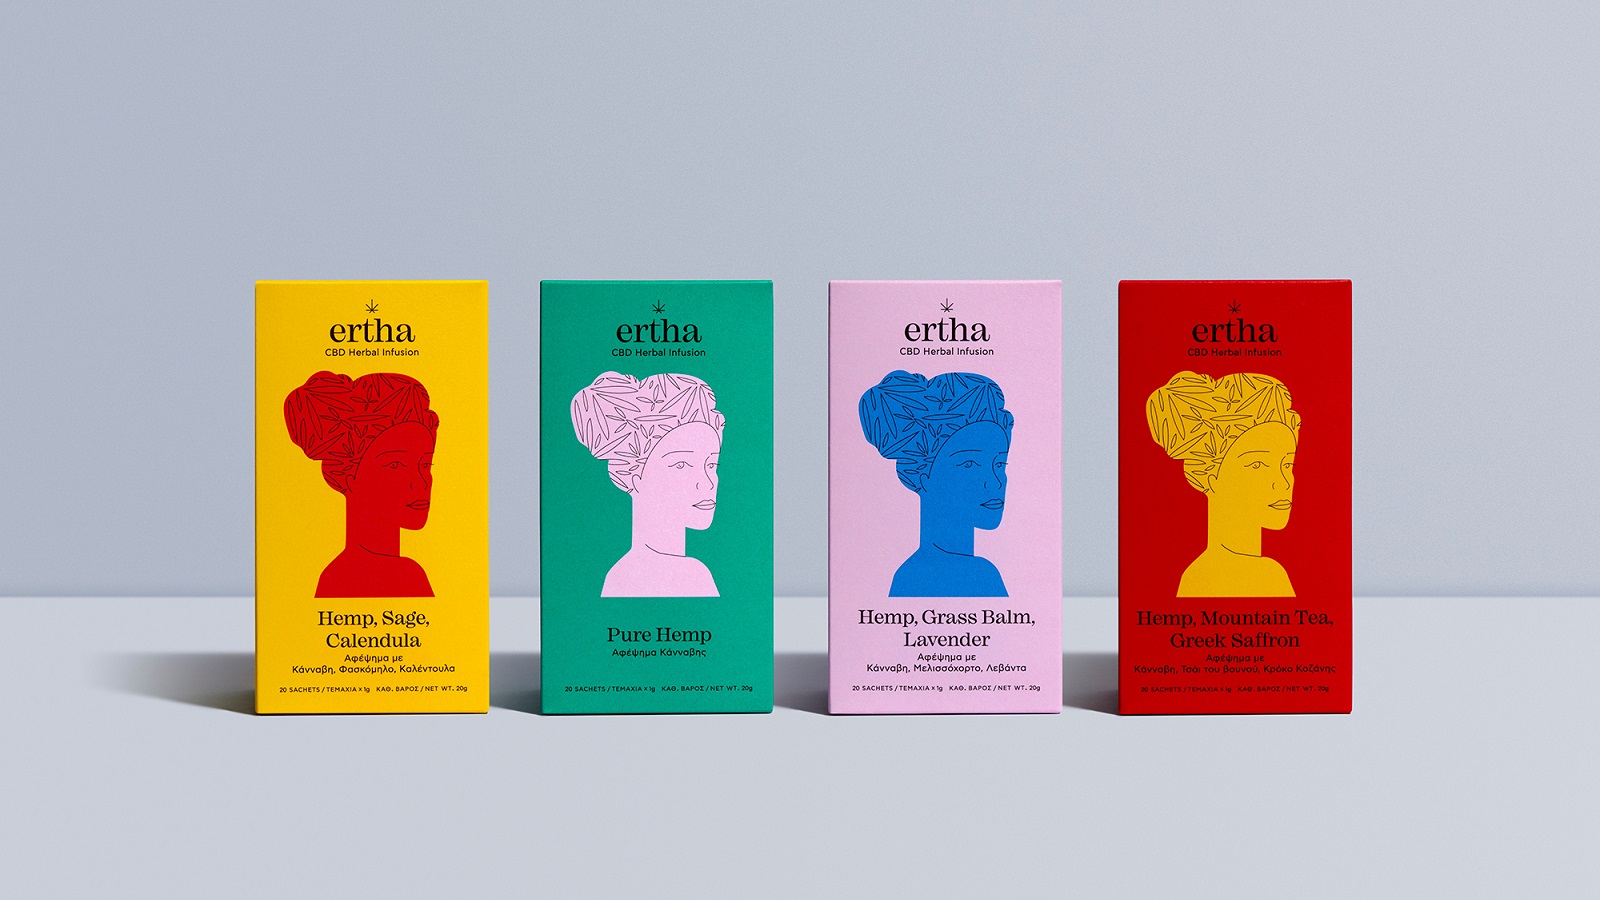 Ertha’s Branding Is in Symbiosis with Mother Nature